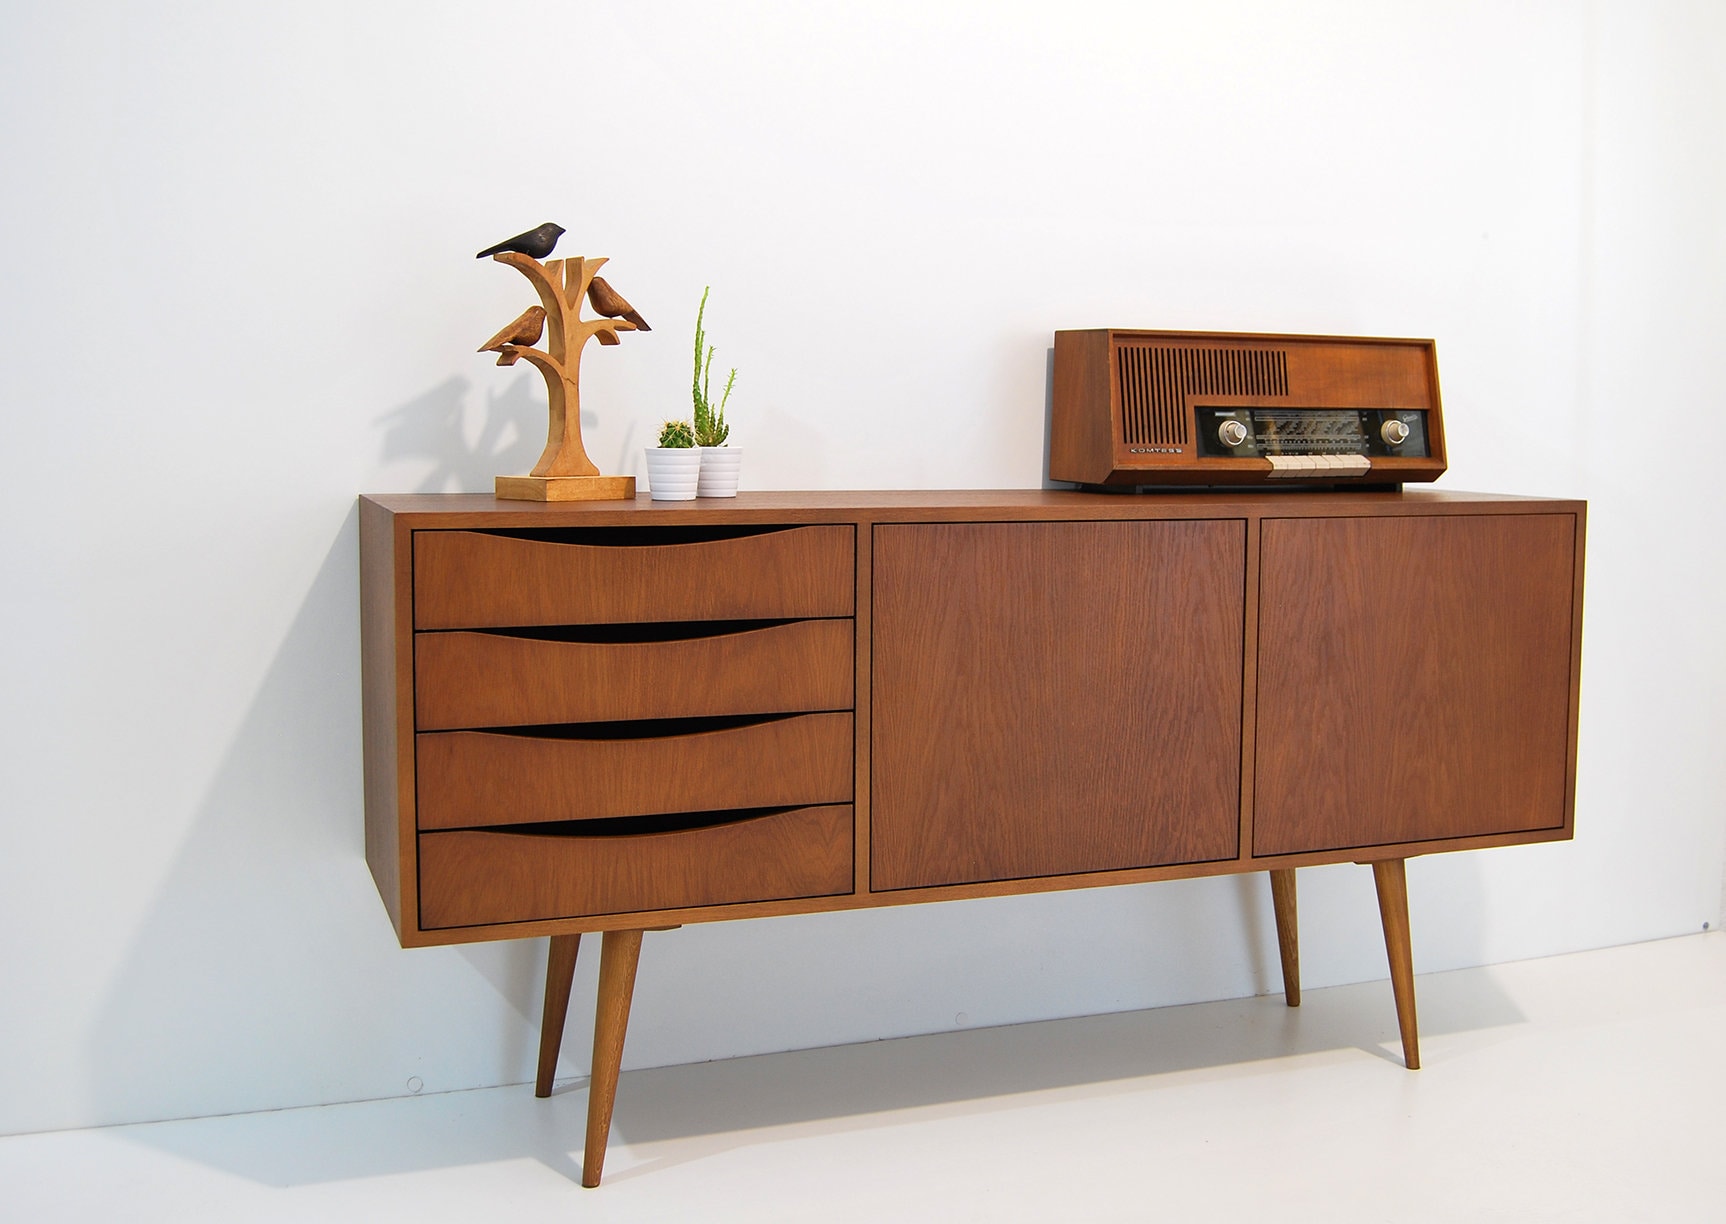 Storage Living Vinyl Unit Console - / Room Drawers Scandinavian Furniture With Mid-century / / Modern Record LP / Etsy Sideboard